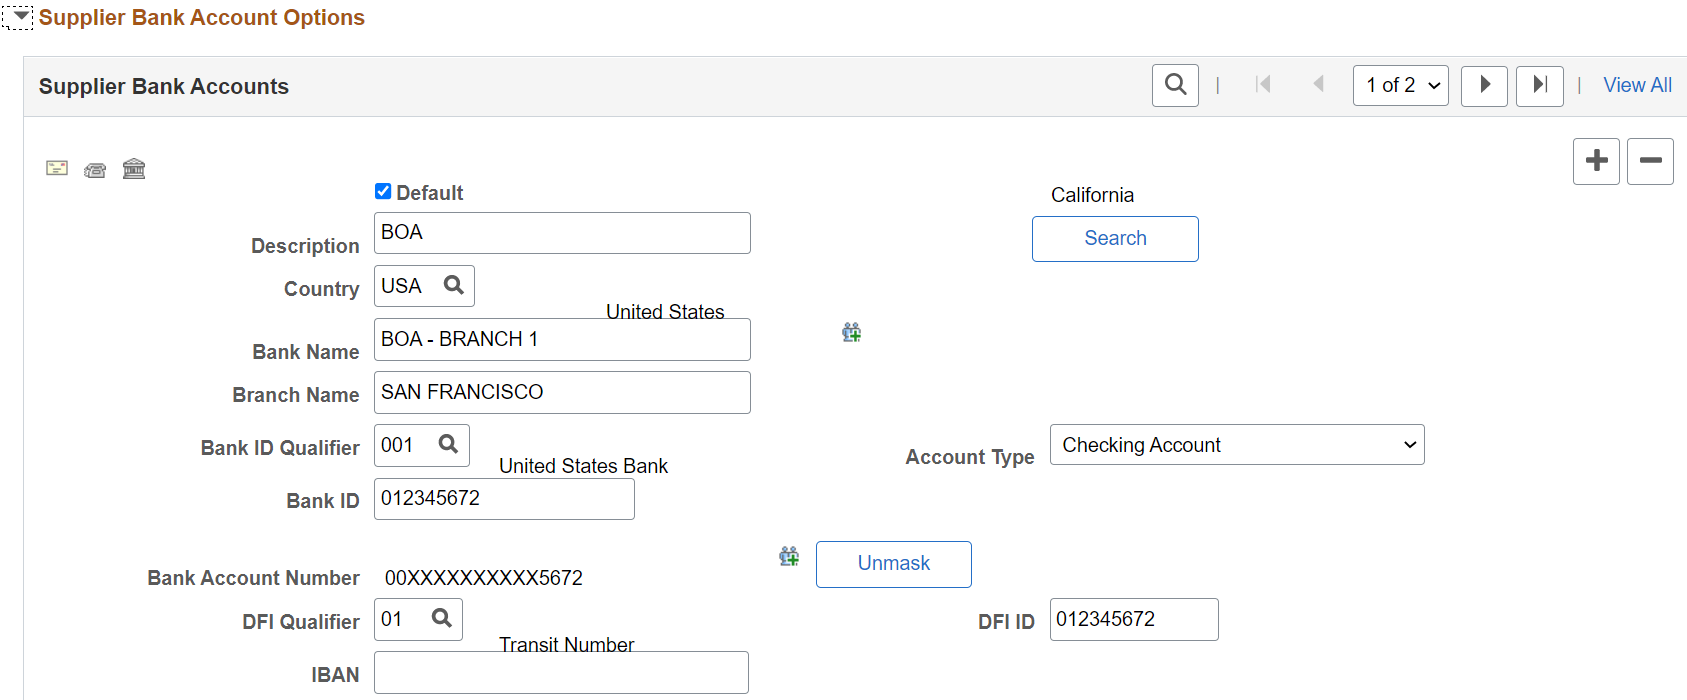 Payables Options page - Supplier Bank Account Options